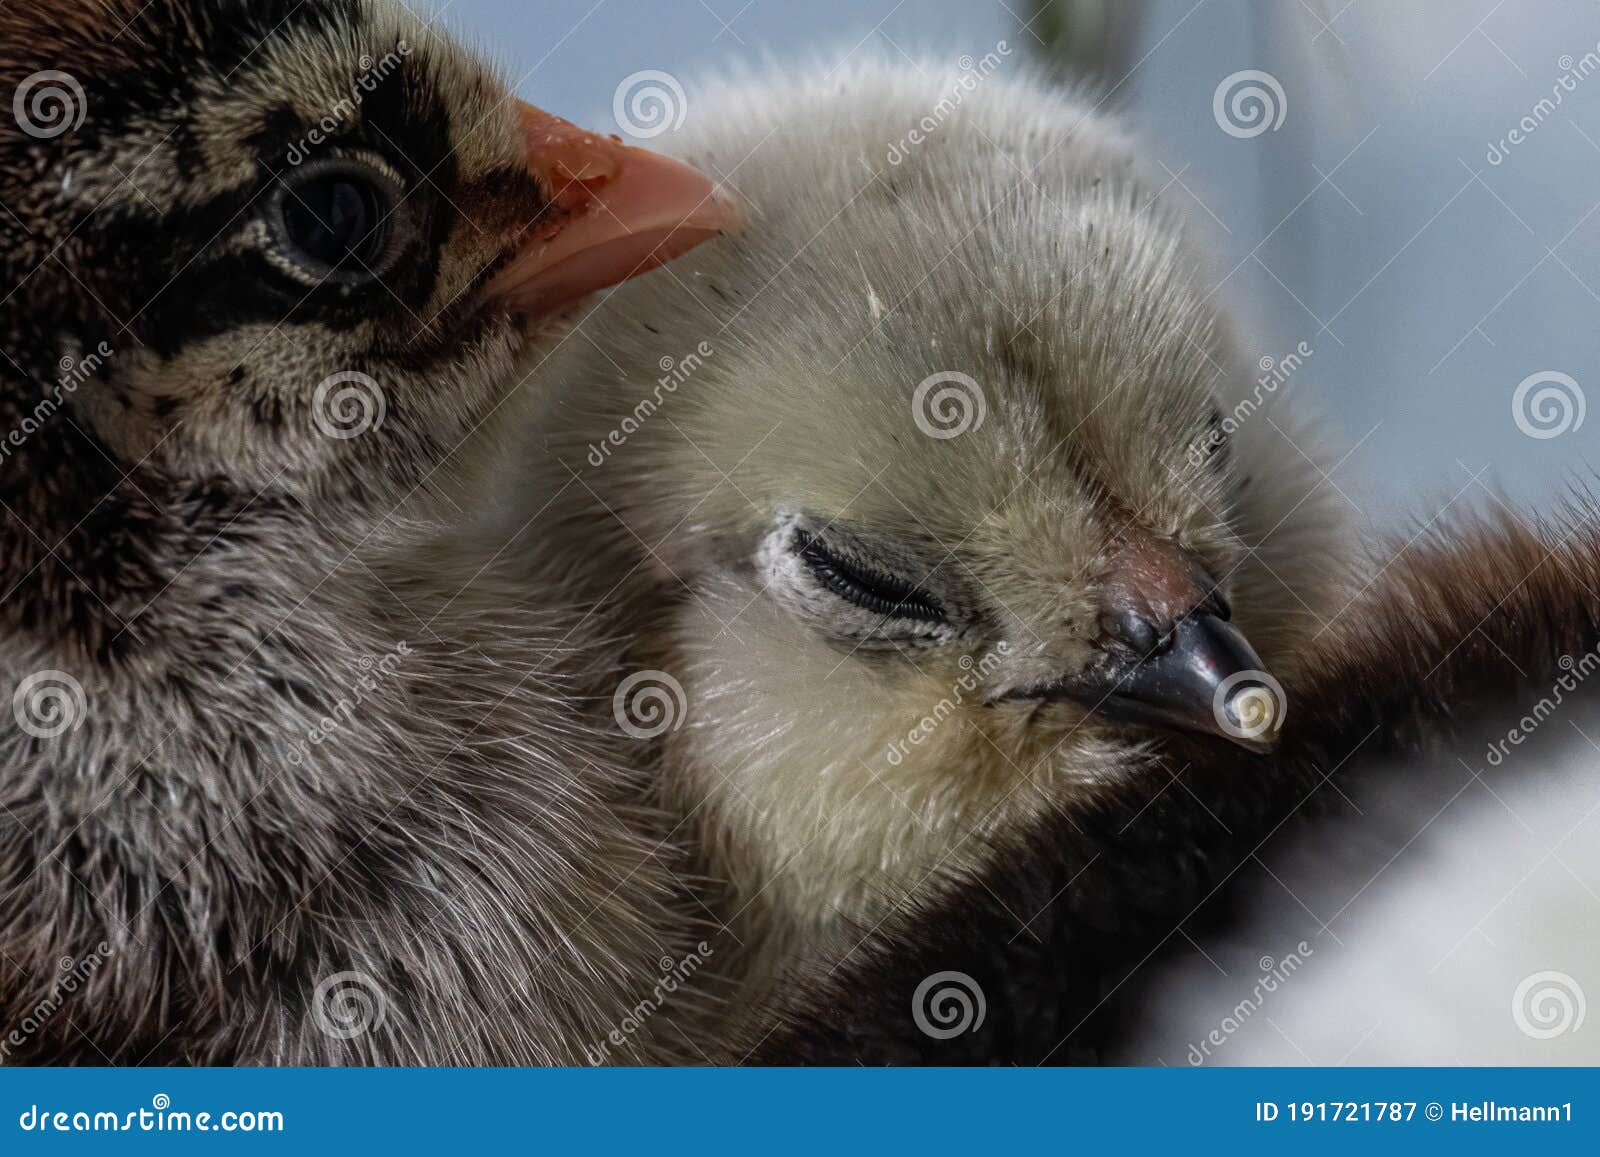 Young Dark Brahma and Lavender Chicken Stock Image - Image of